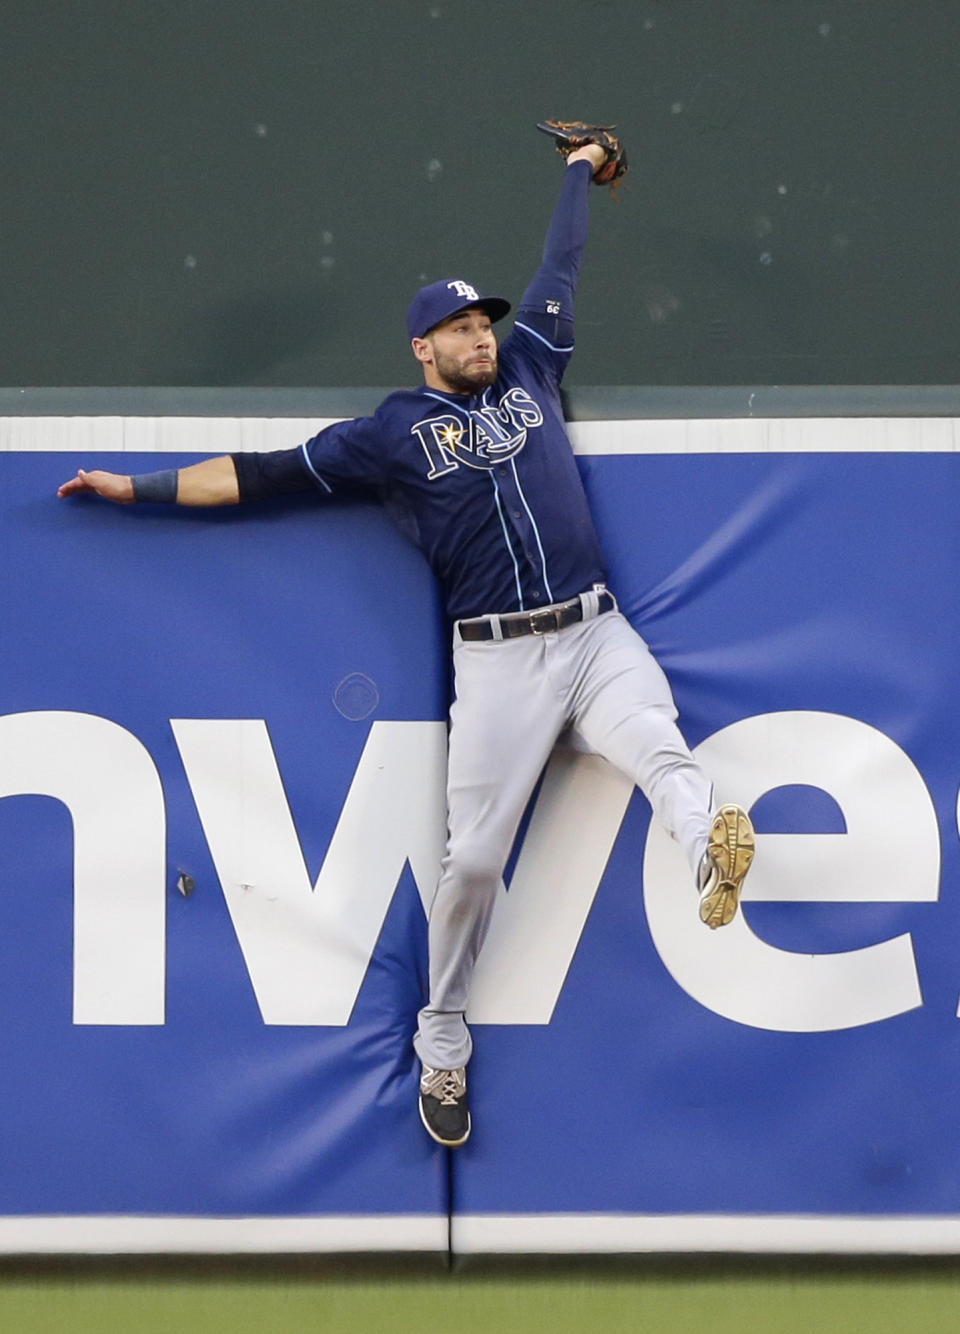 FILE - In this Monday, Aug. 31, 2015 file photo,Tampa Bay Rays center fielder Kevin Kiermaier collides with the outfield wall after catching a fly ball by Baltimore Orioles' Manny Machado in the first inning of a baseball game in Baltimore. Everyone has seen an outfielder receive a tip of the cap or a jubilant fist bump from a pitcher after a home run robbery. This is a story about what happens after they leave the field. (AP Photo/Patrick Semansky, File)